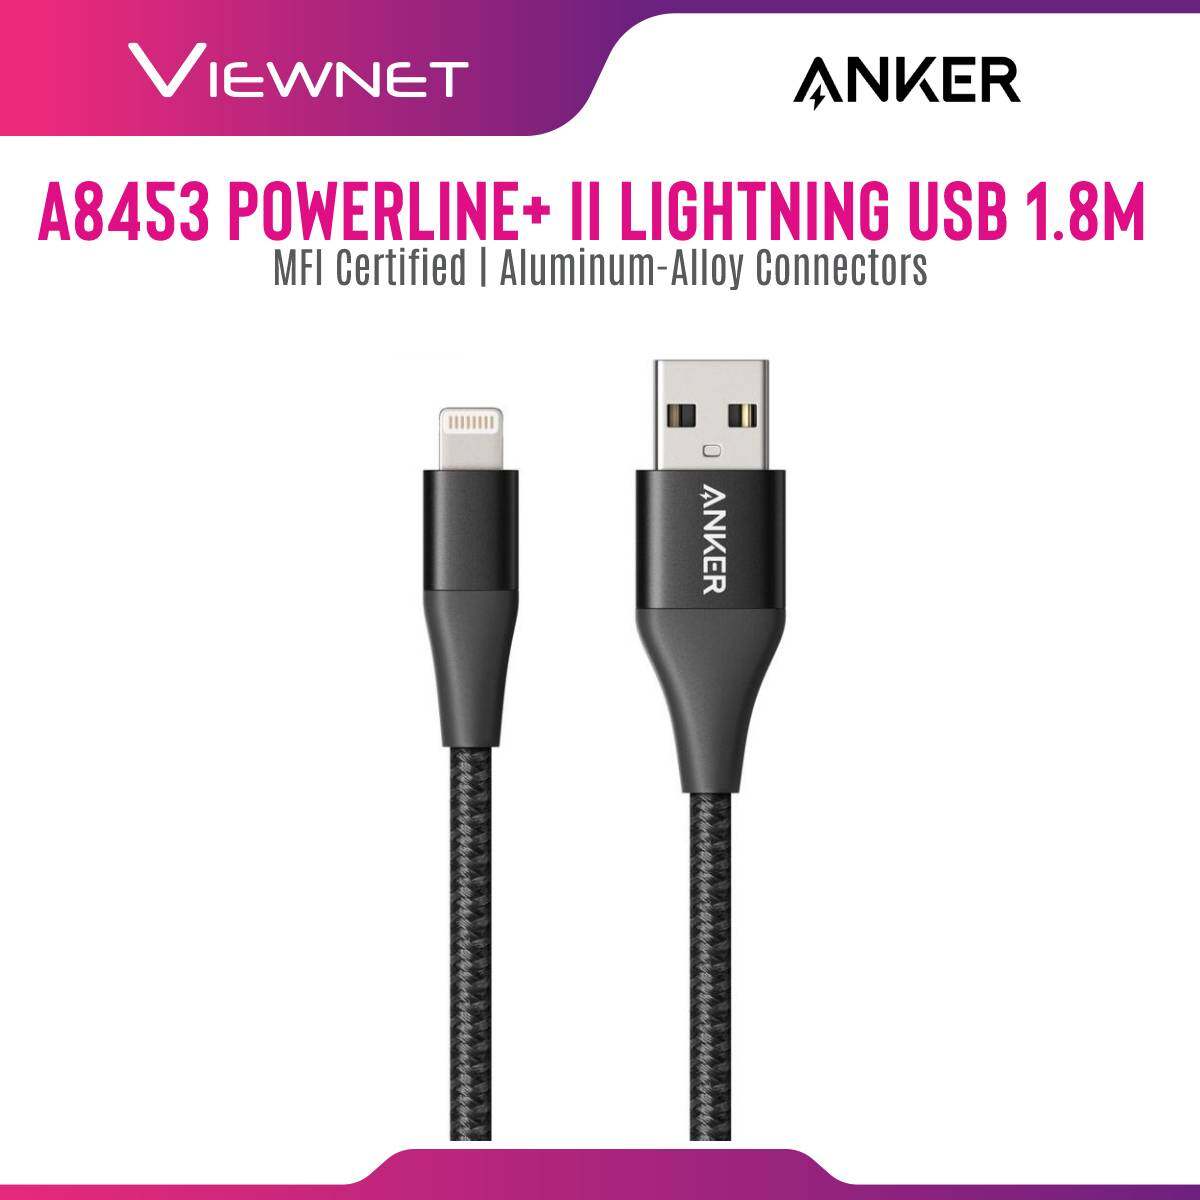 Anker A8453 PowerLine+ II 1.8M MFI Certified Lightning Cable - Red/Black (6ft)